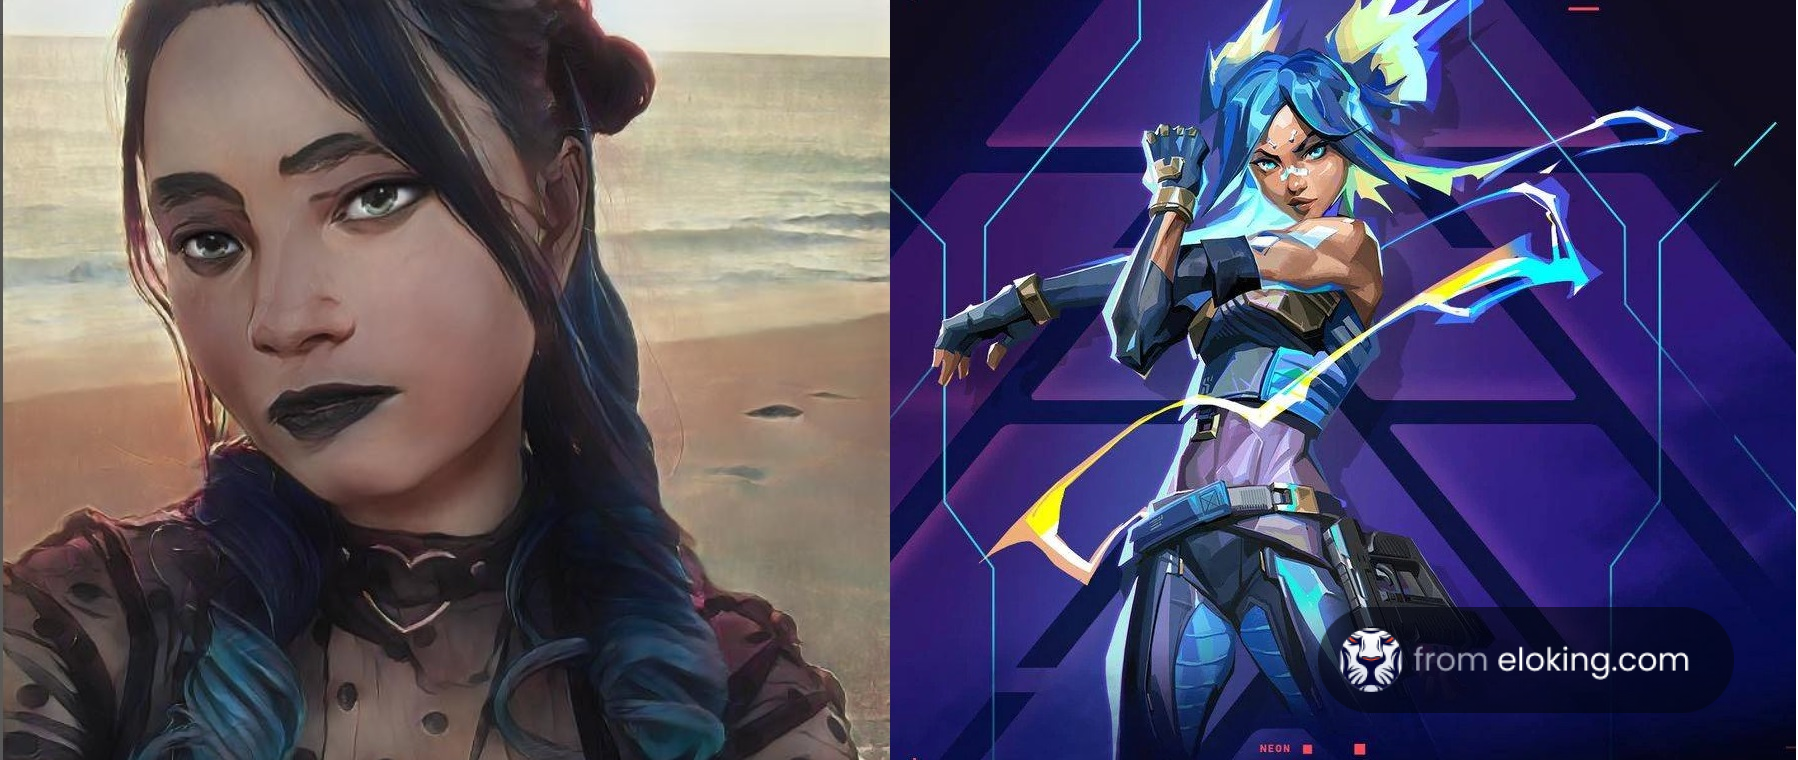 A split image featuring a portrait of a woman with dark hair and a gothic look on the left, and a dynamic action figure with blue hair and futuristic armor on the right